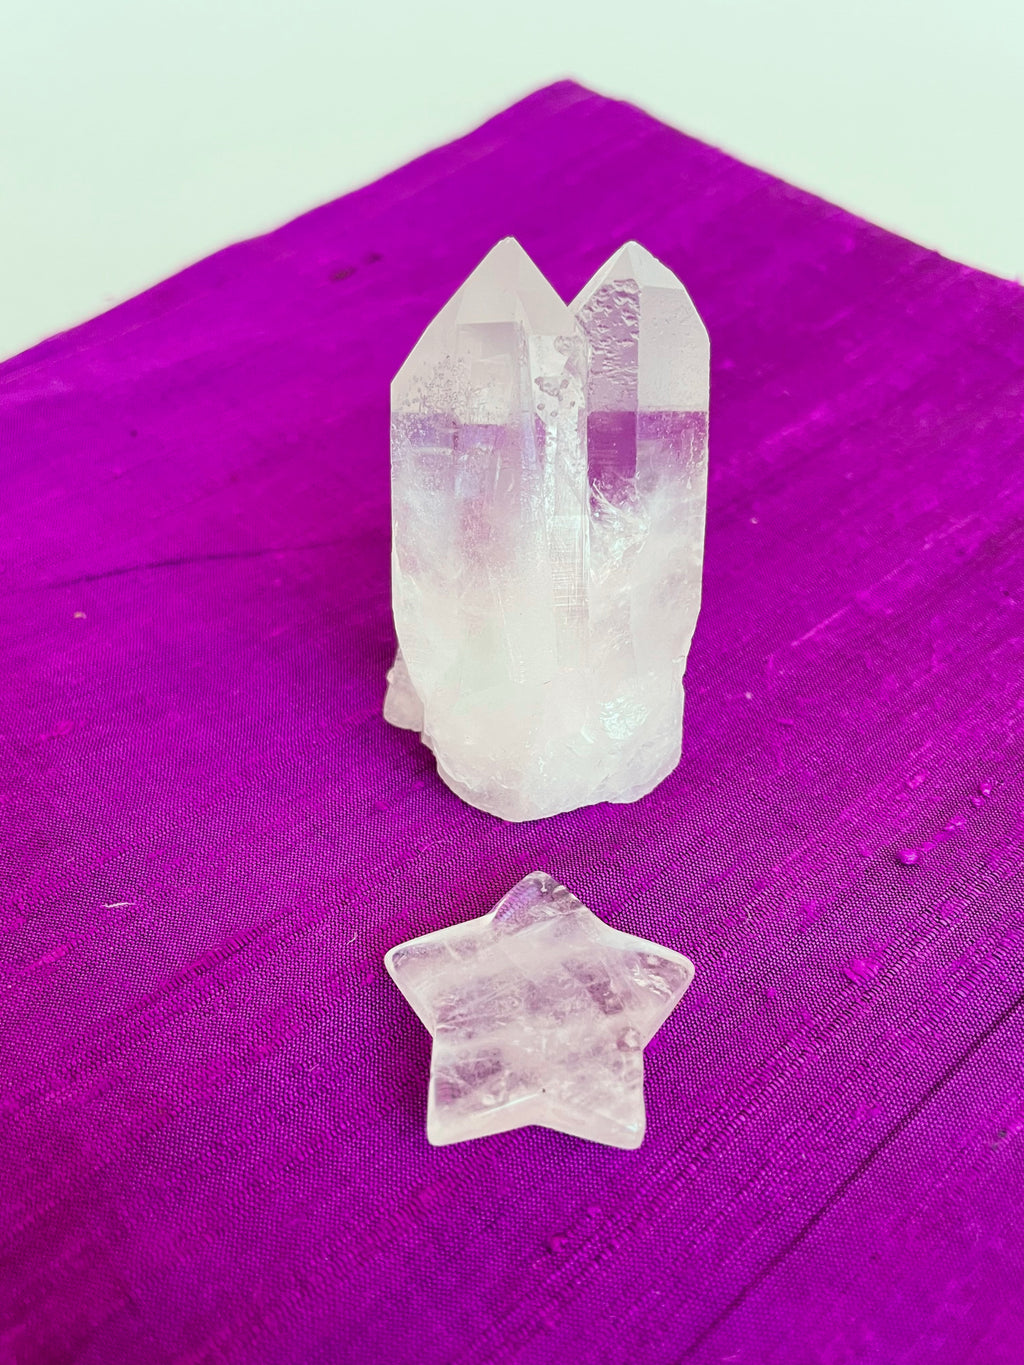 This powerful little quartz crystal star can be used for meditation, healing, for your altar, or as décor for any room in your home or office. Easy to slip right into your pocket so you can take the energy of Quartz everywhere you go.  Quartz is the "most powerful healing and energy amplifier on the planet" (Judy Hall). Approximately 1¼". Cost is $6.  